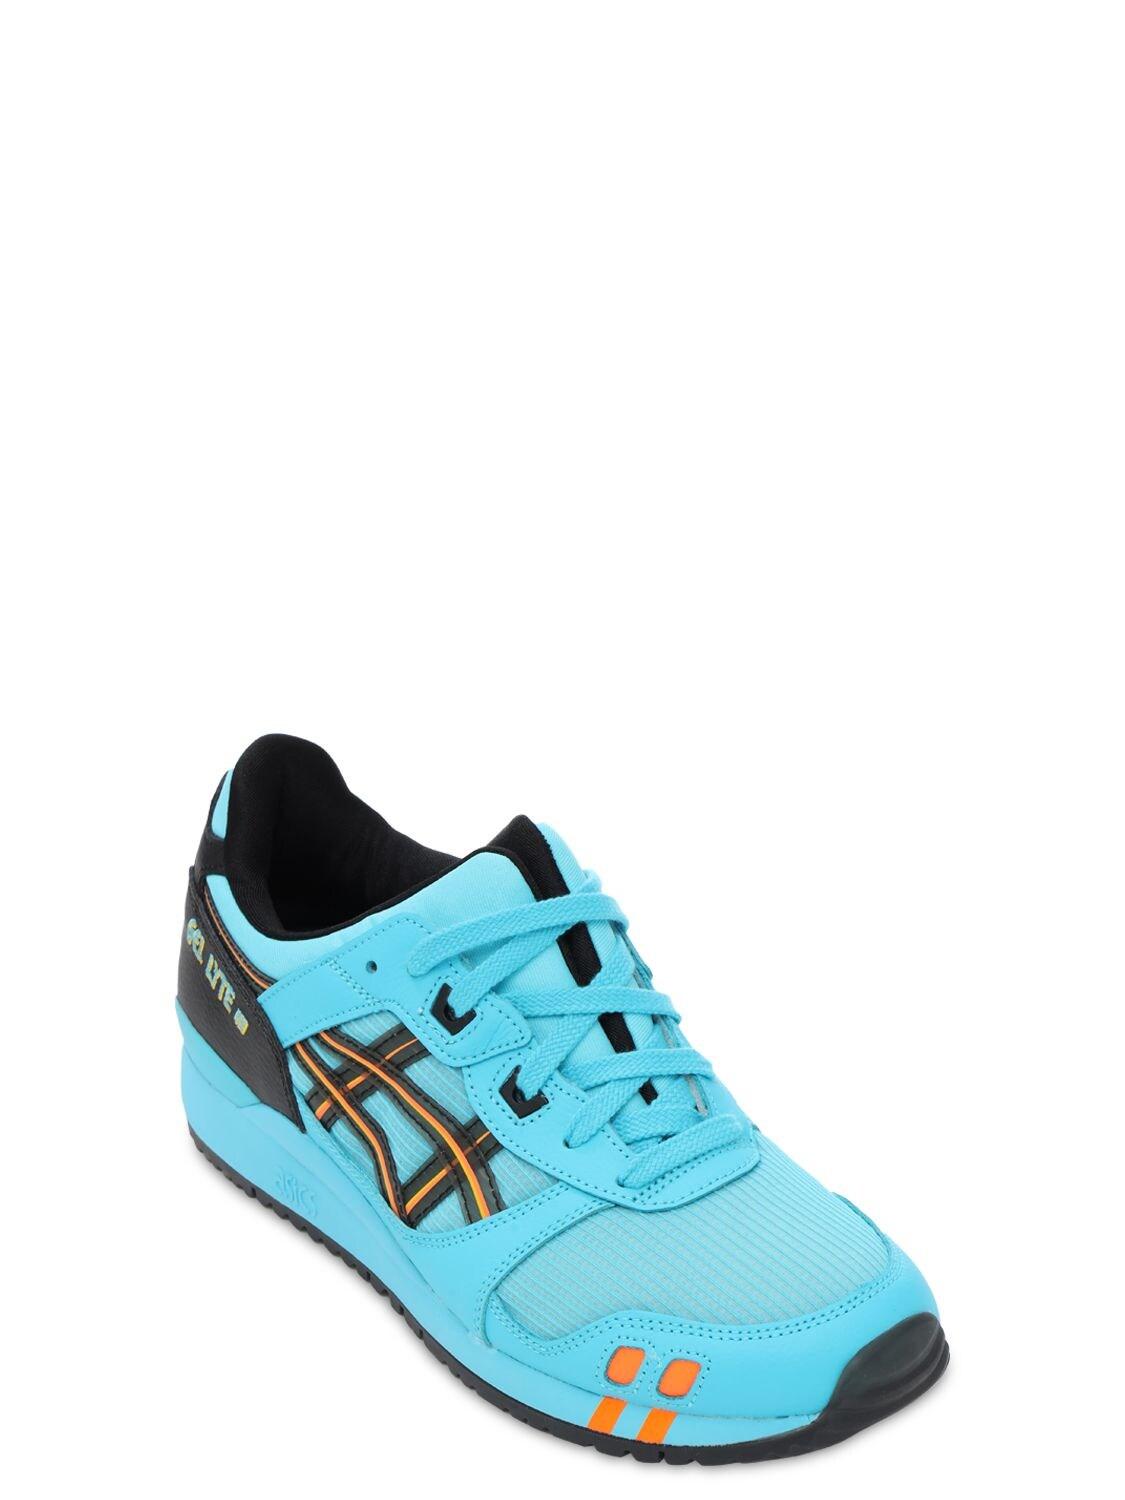 Asics Leather Gel Lyte Iii Sneakers in Blue for Men - Save 55% - Lyst